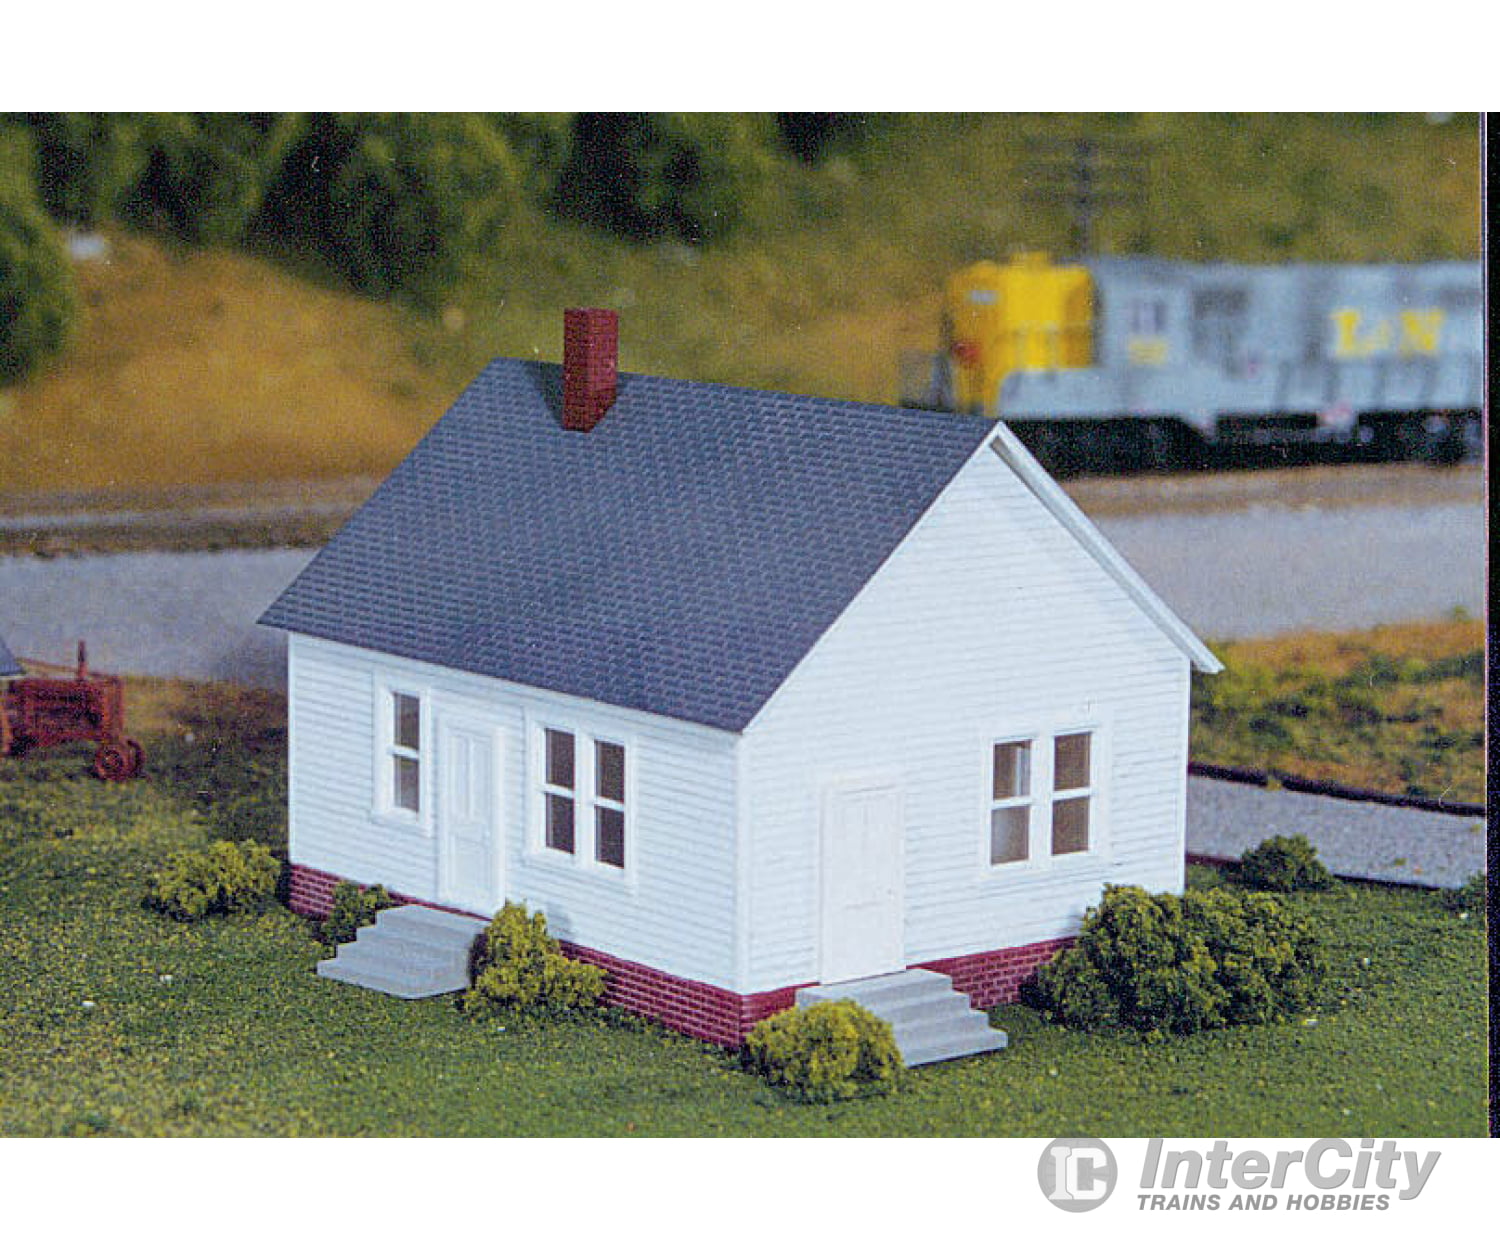 Rix Products 201 One-Story House -- Kit - 3 X 3-7/8 7.7 9.9Cm Structures